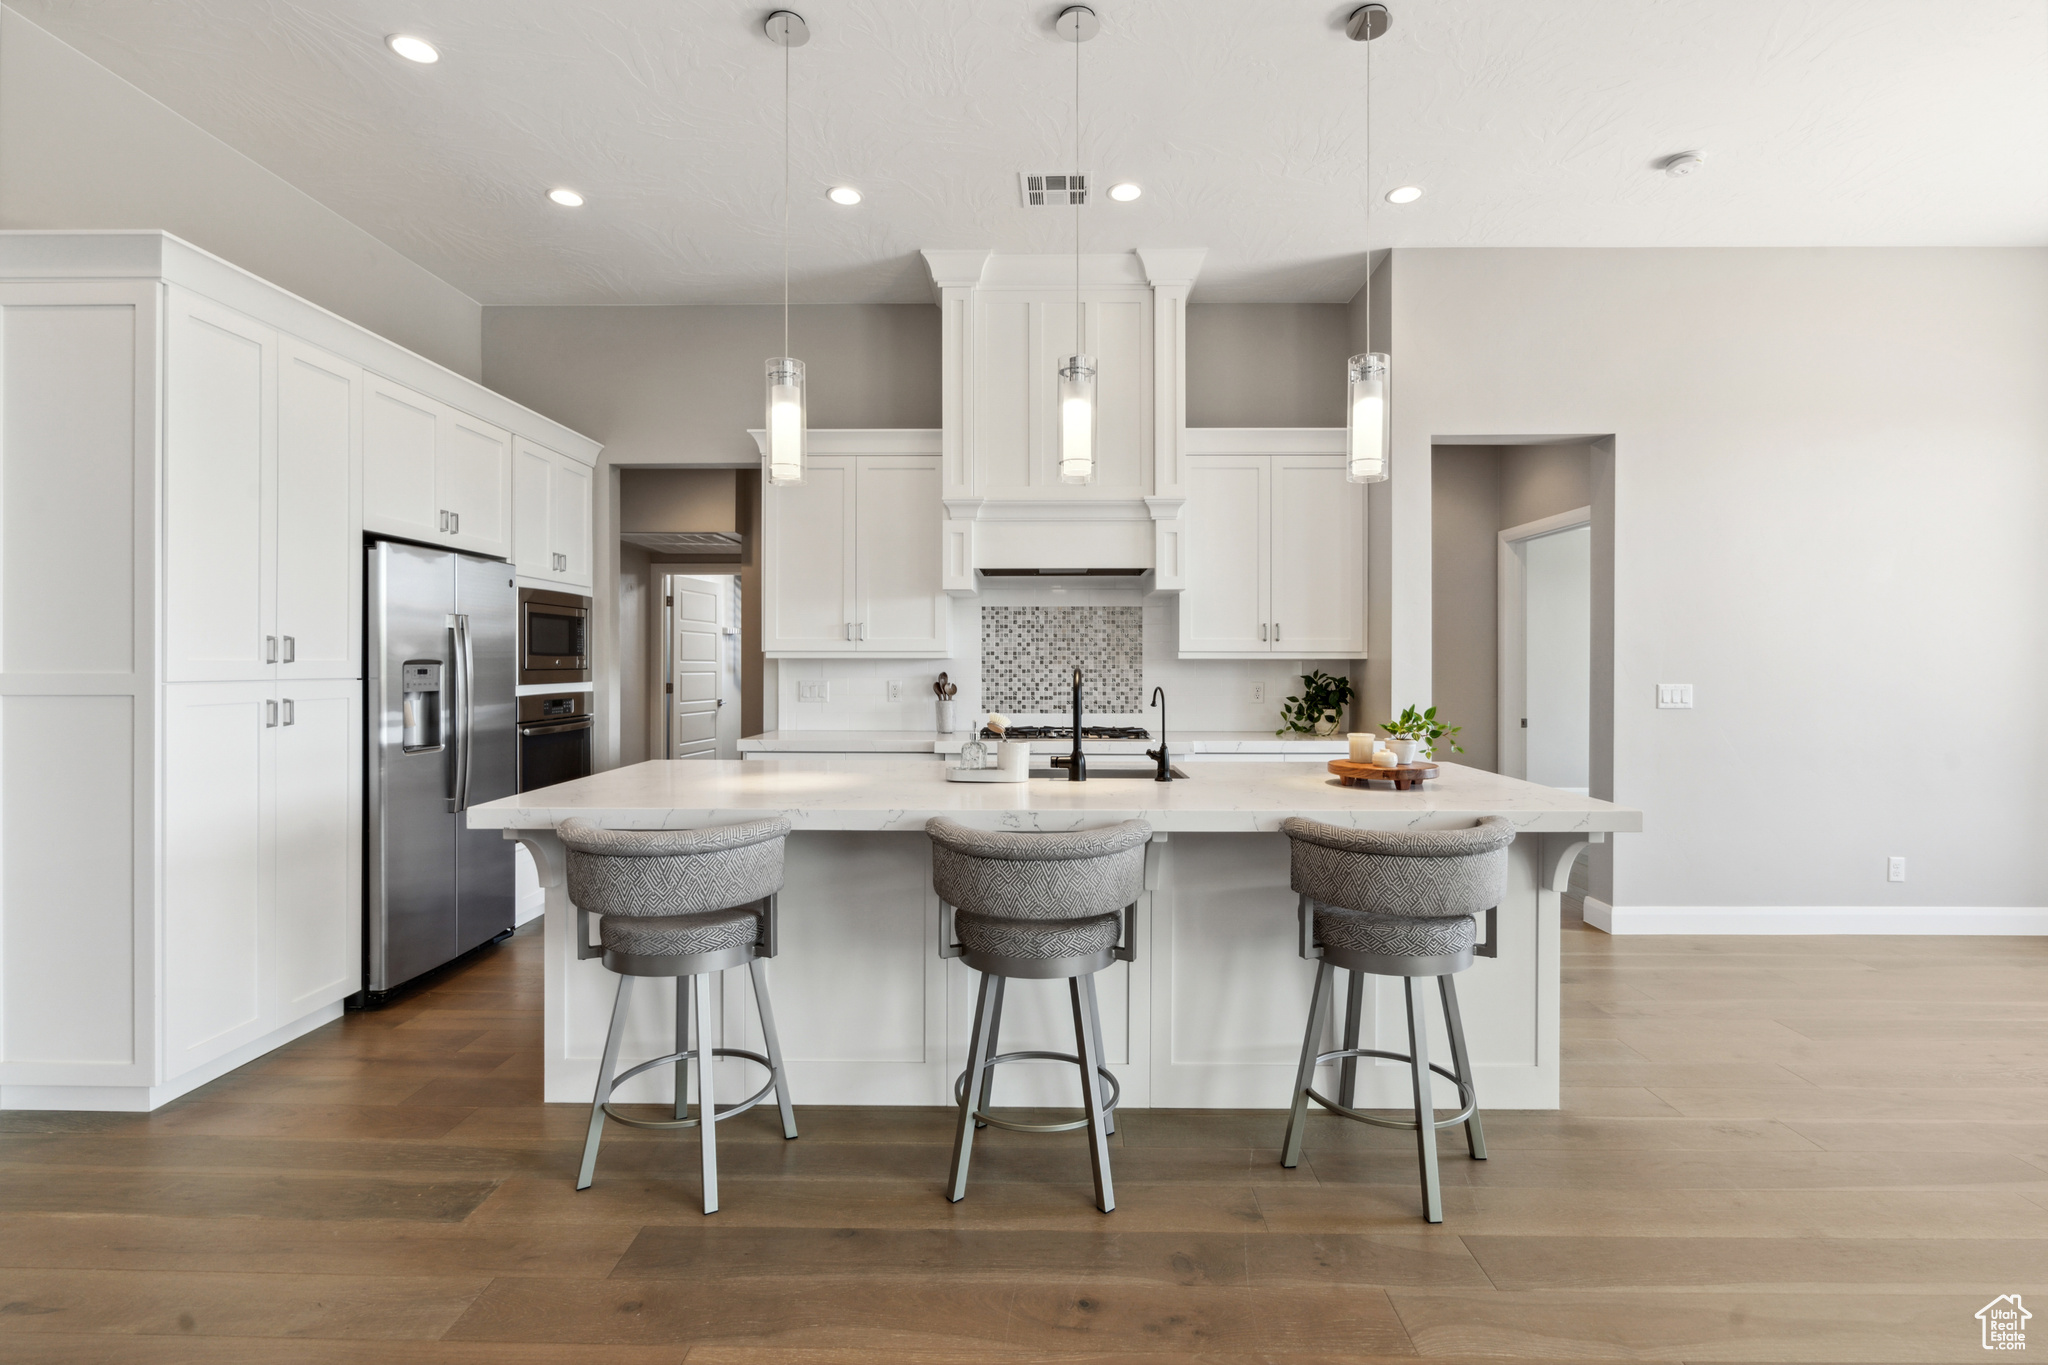 Kitchen with decorative light fixtures, wood-type flooring, white cabinets, and stainless steel appliances